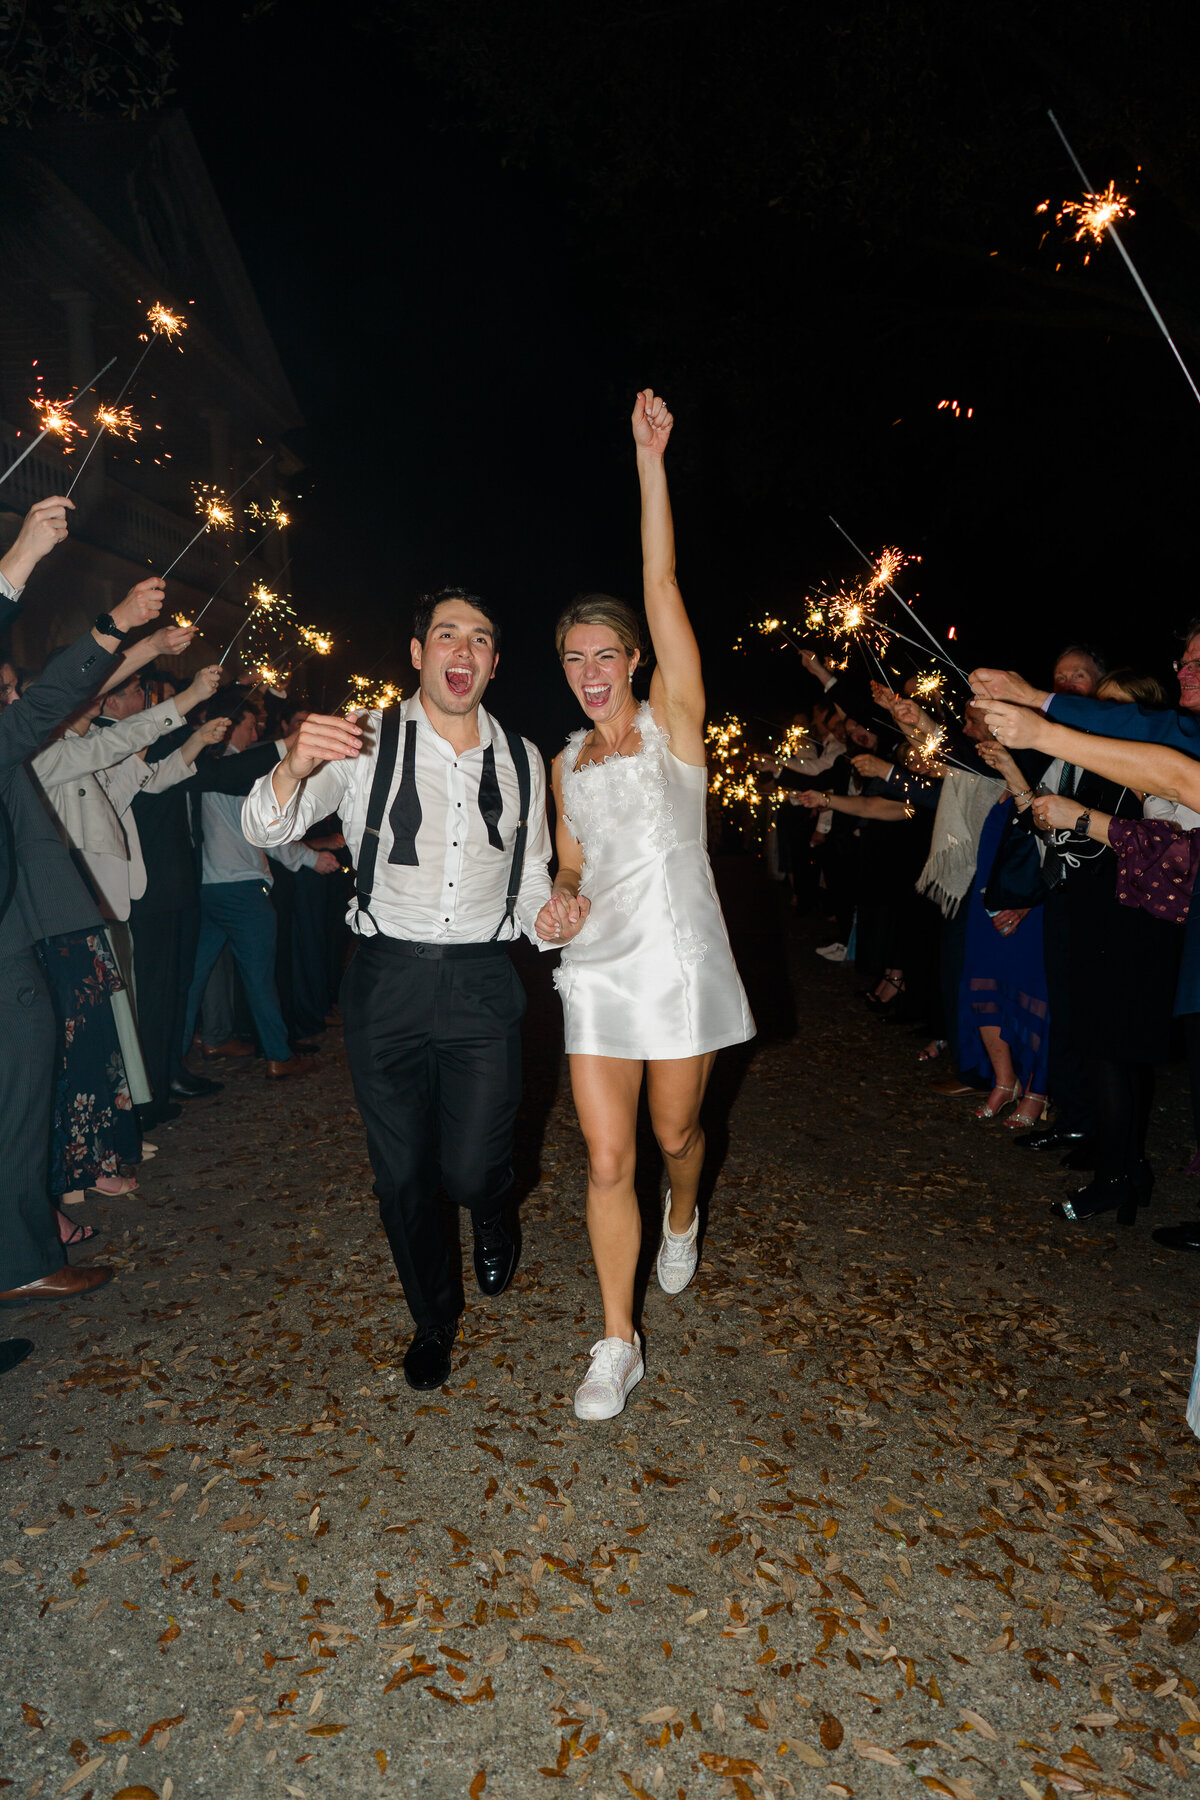 Sparkler exit at Lowndes Grove. Bride and groom celebrate while running through the crowd after epic party wedding reception with live band.